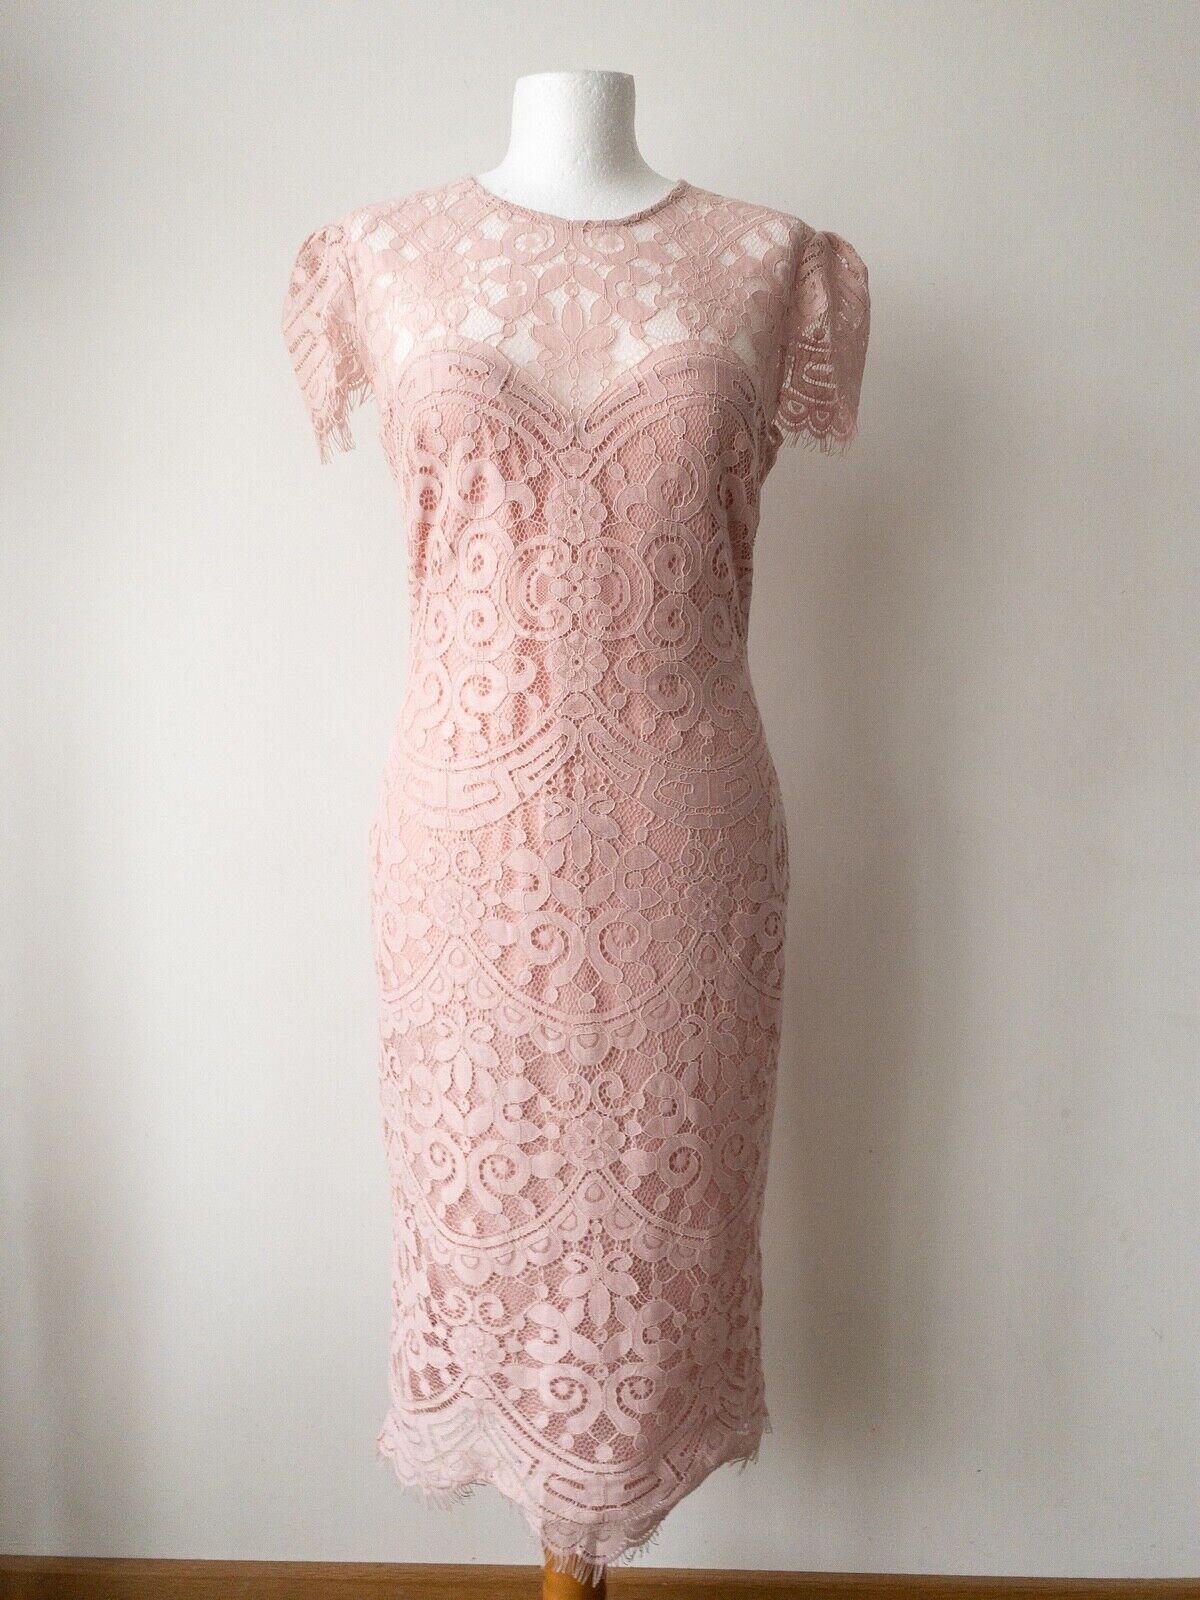 Goddiva London Cap Sleeve Lace Dress Available in Duck Egg Green or Blush Pink